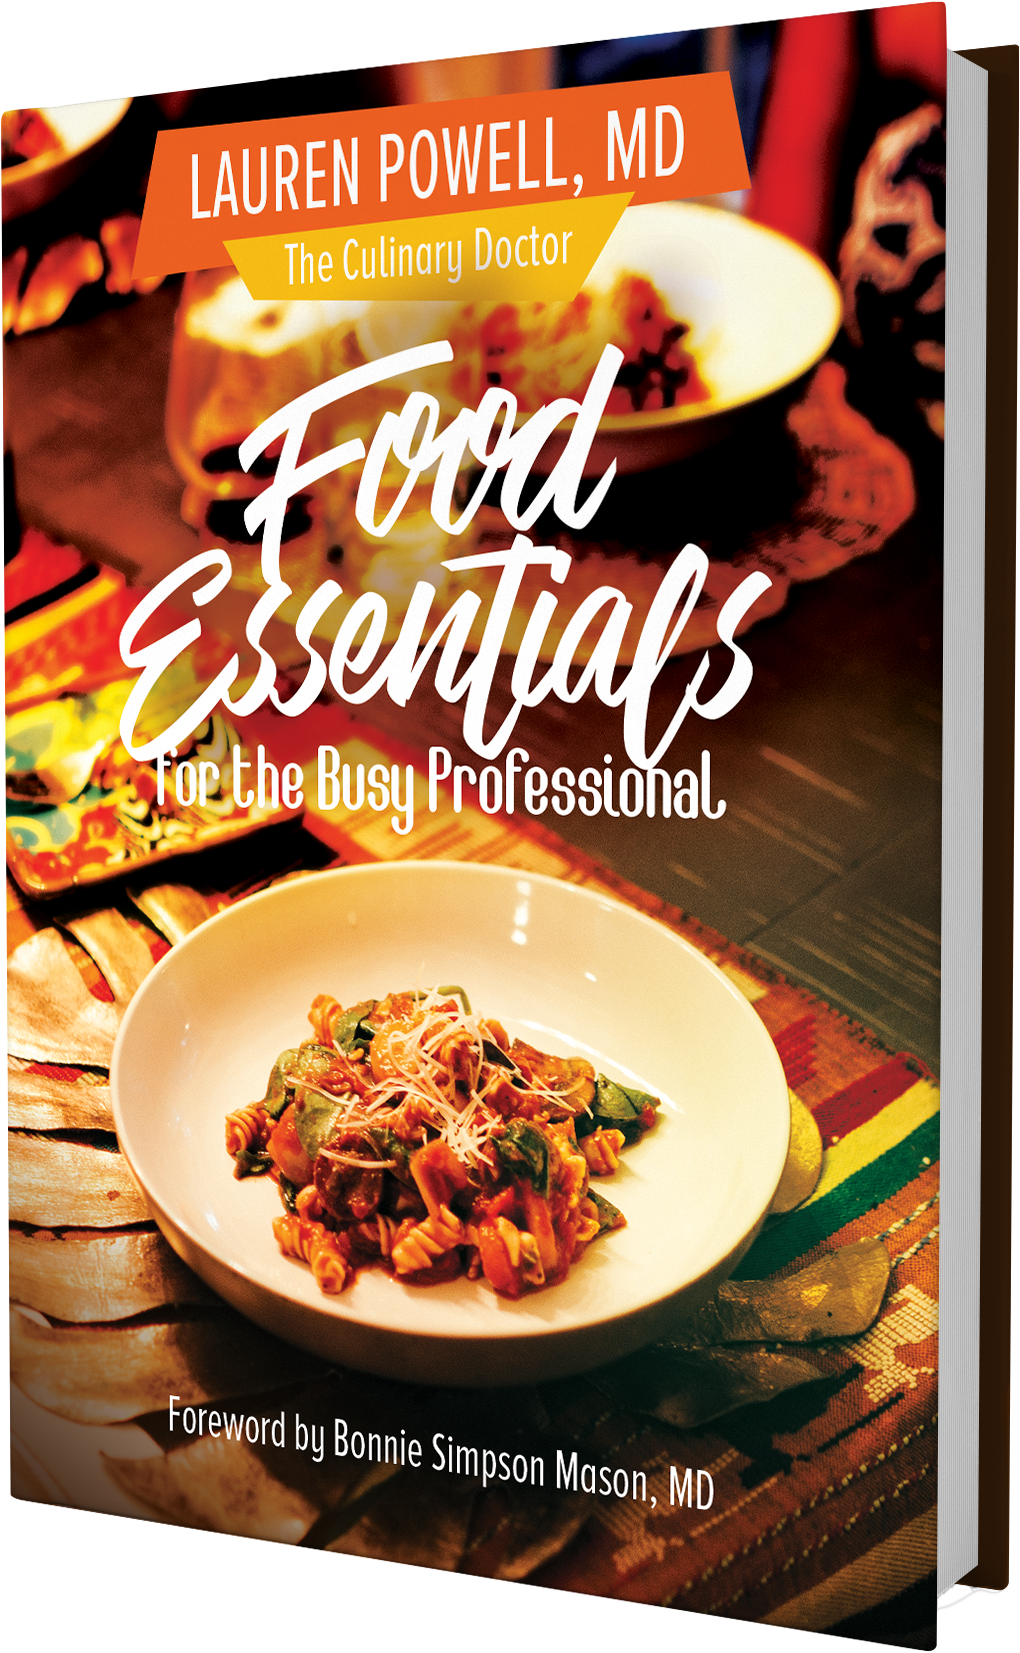 Food Essentials for The Busy Professional